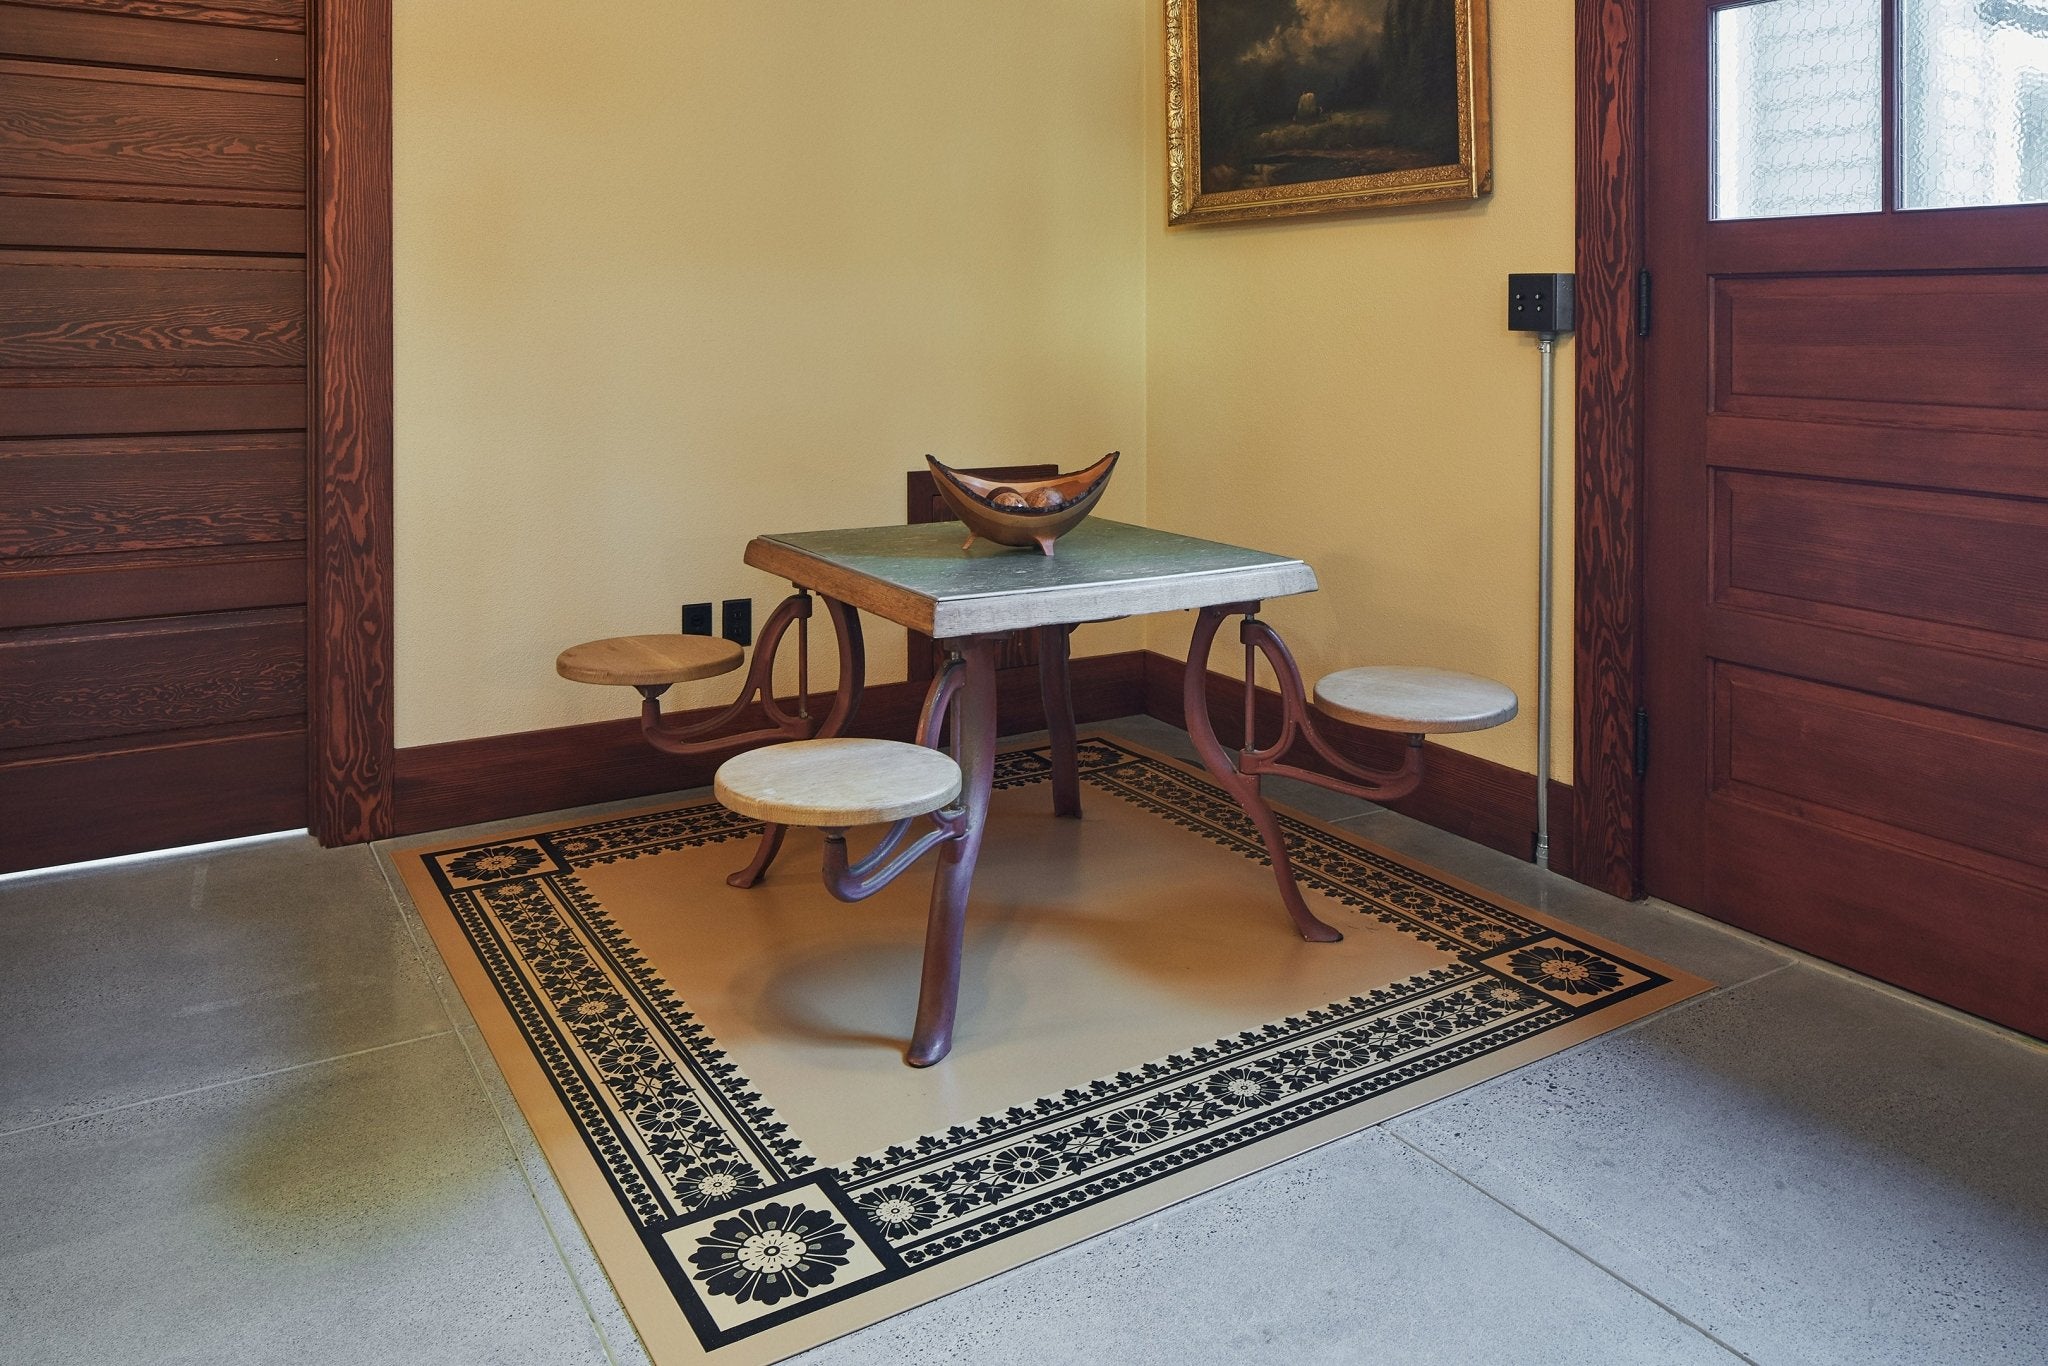 In-situ image of this floorcloth based on a pattern from Christopher Dresser's "Studies in Design" c. 1875. Photo by Sally Painter.